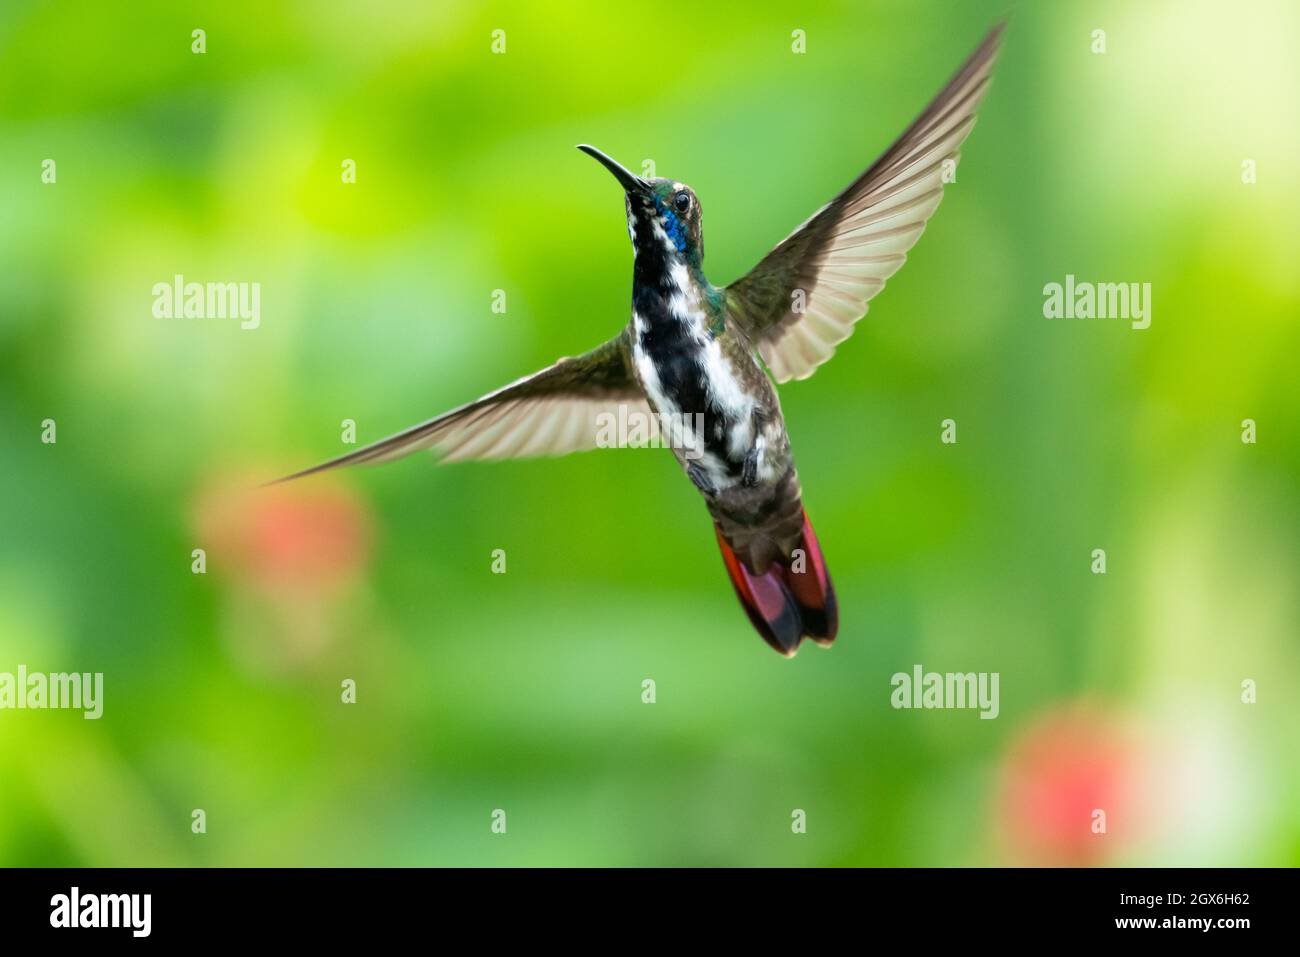 A young male Black-throated Mango hummingbird, Anthracothorax Nigricollis, hovers in the air with wings spread and a blurred background. Stock Photo